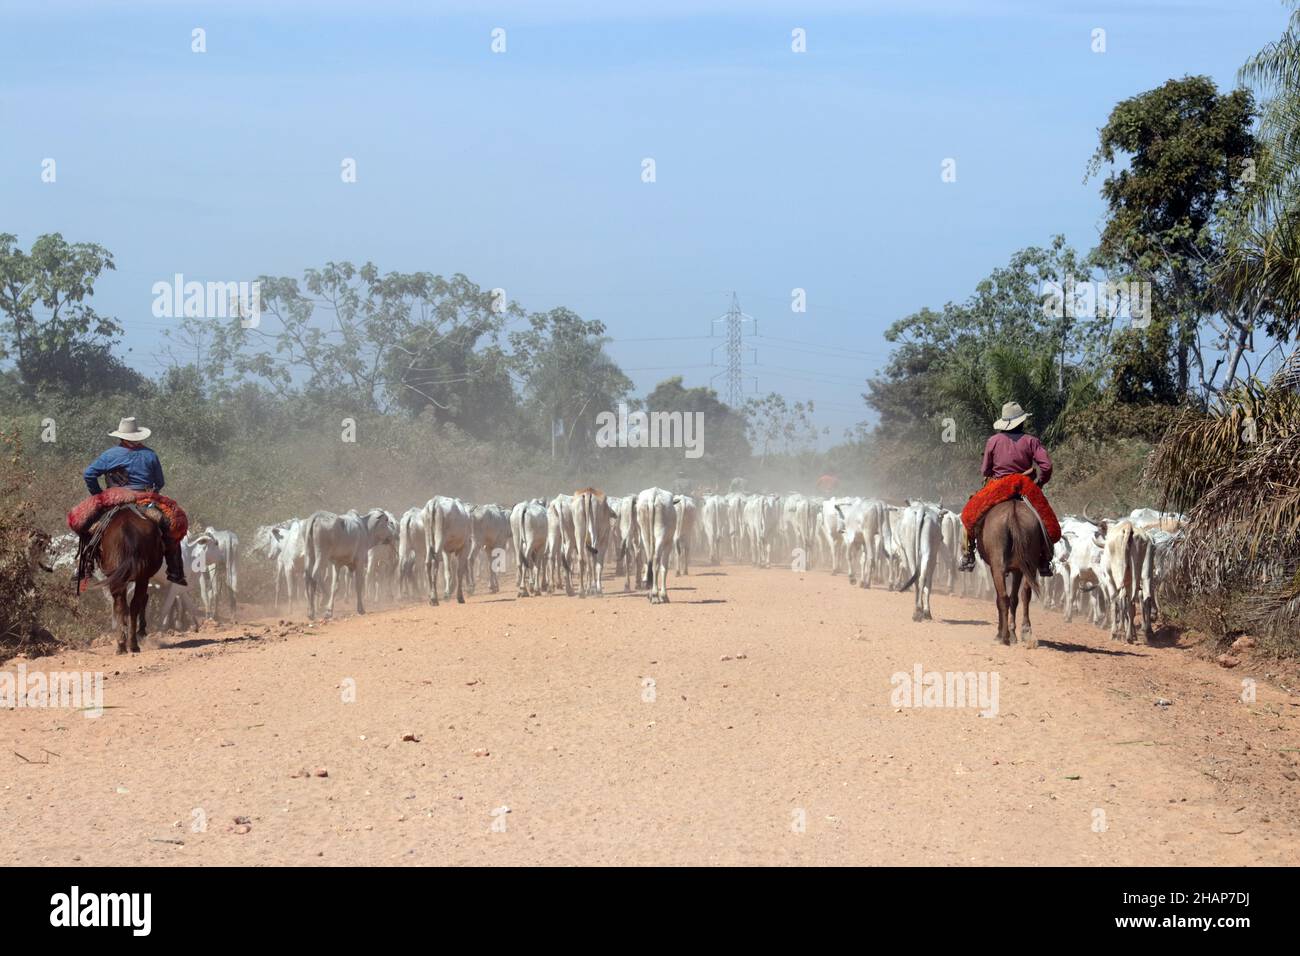 CORUMBA MS, BRAZIL - Aug 18, 2018: Cattle transport by cowboys on horseback on the nature parkway in the Brazilian Pantanal. Stock Photo